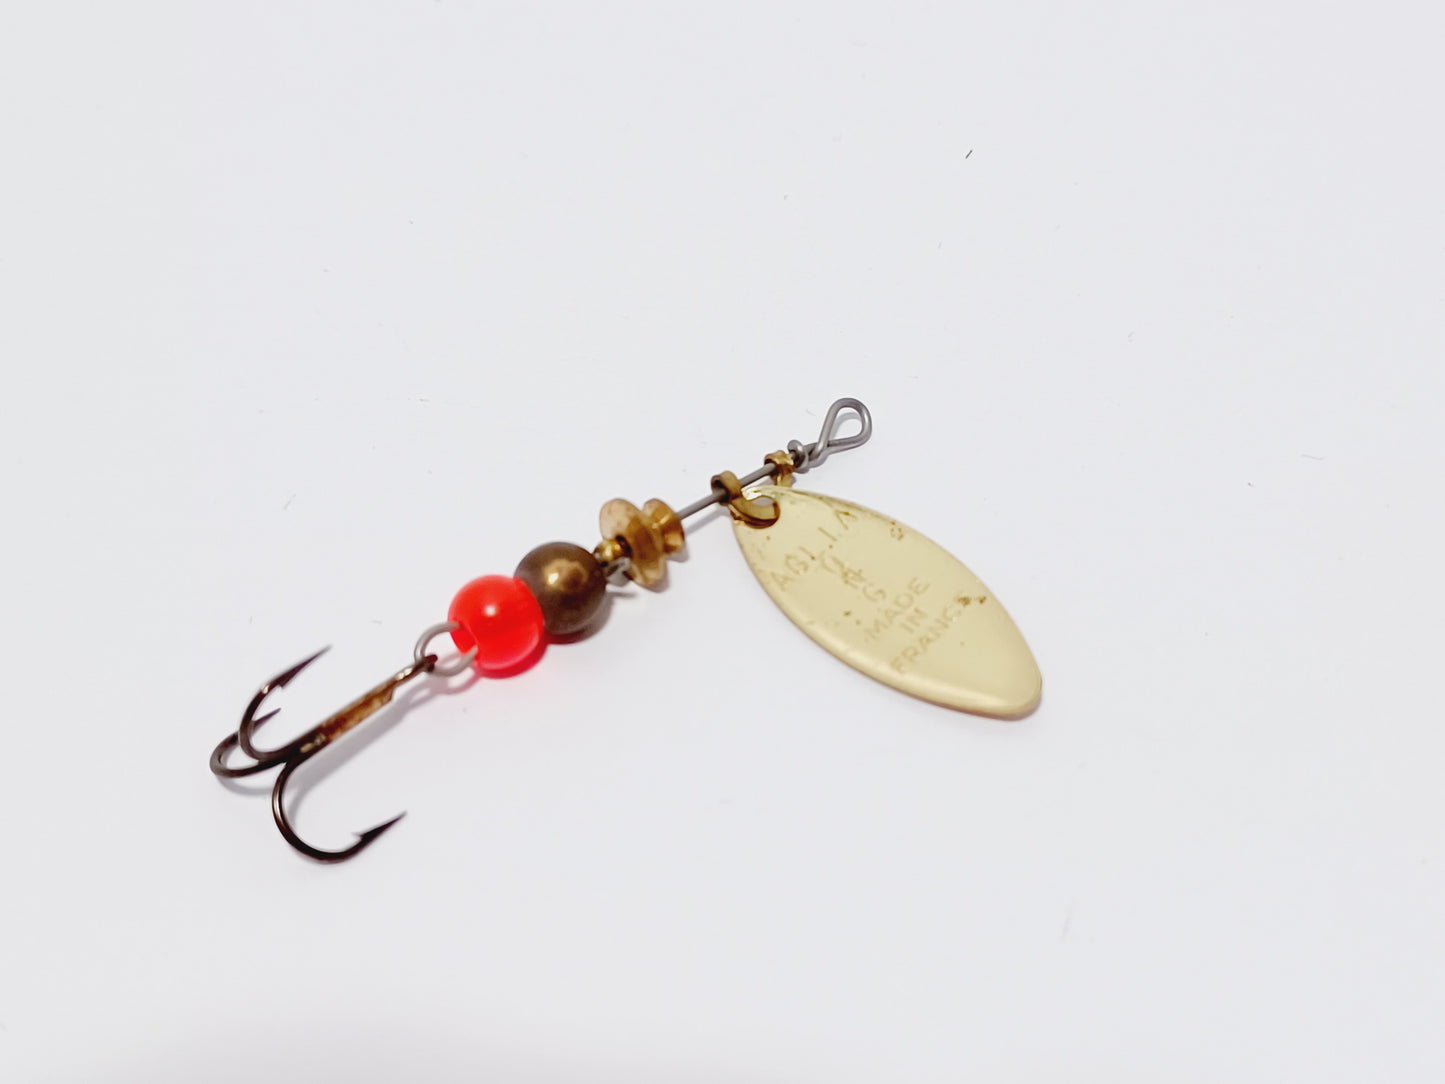 Vintage Mepps Aglia long #0 spinning lure